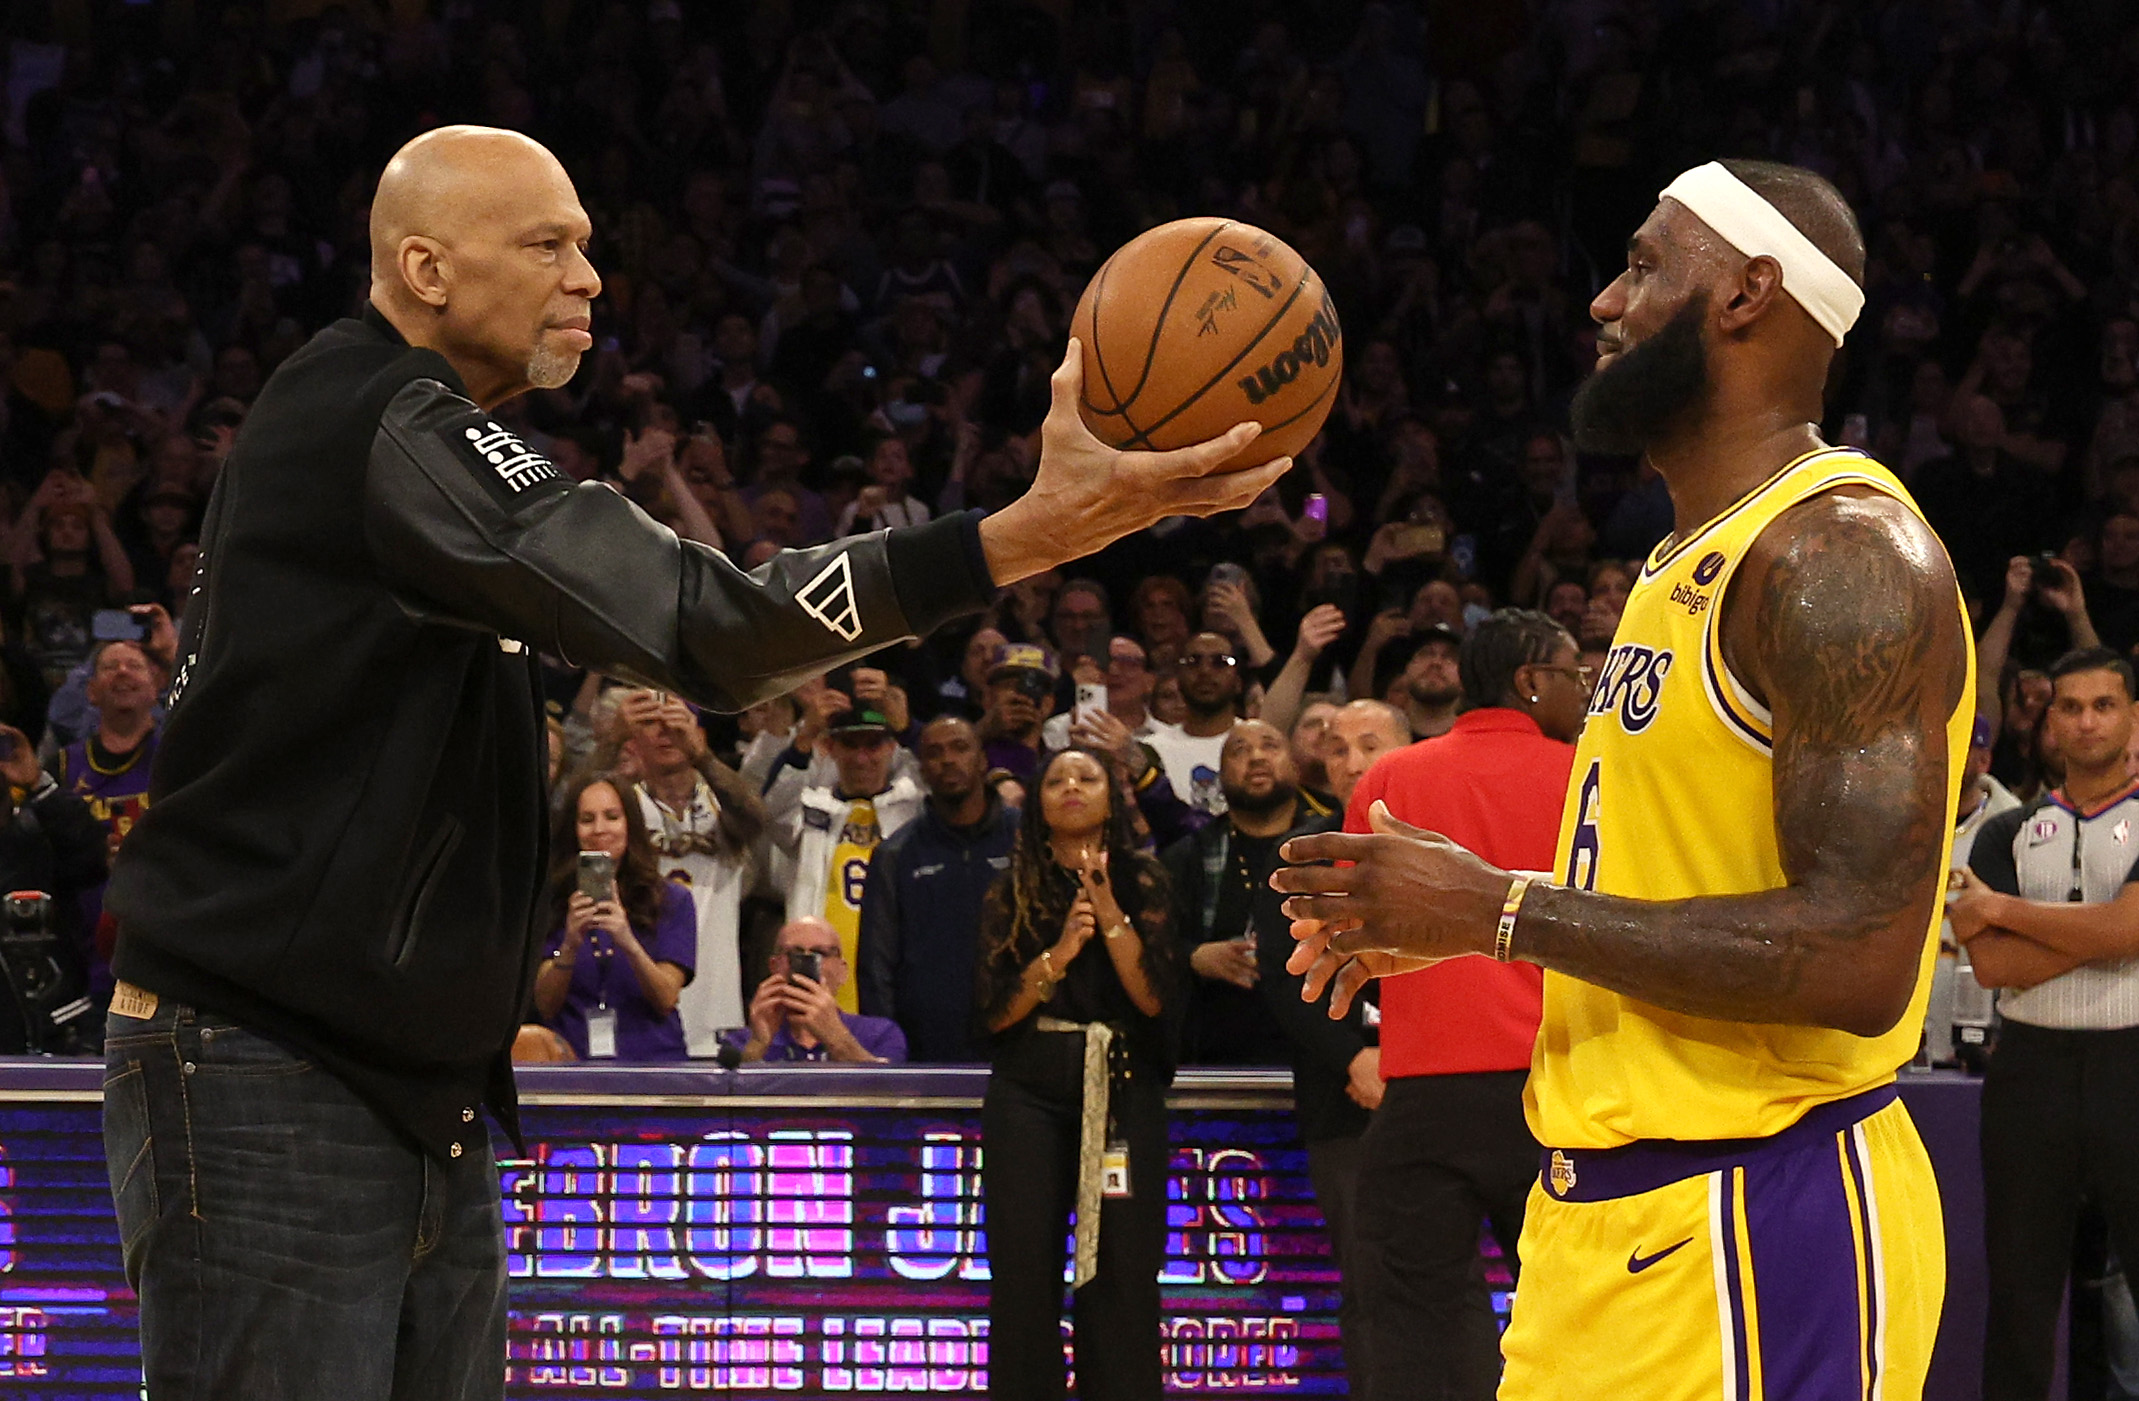 The Most Career Points By Position: Kareem Abdul-Jabbar And LeBron